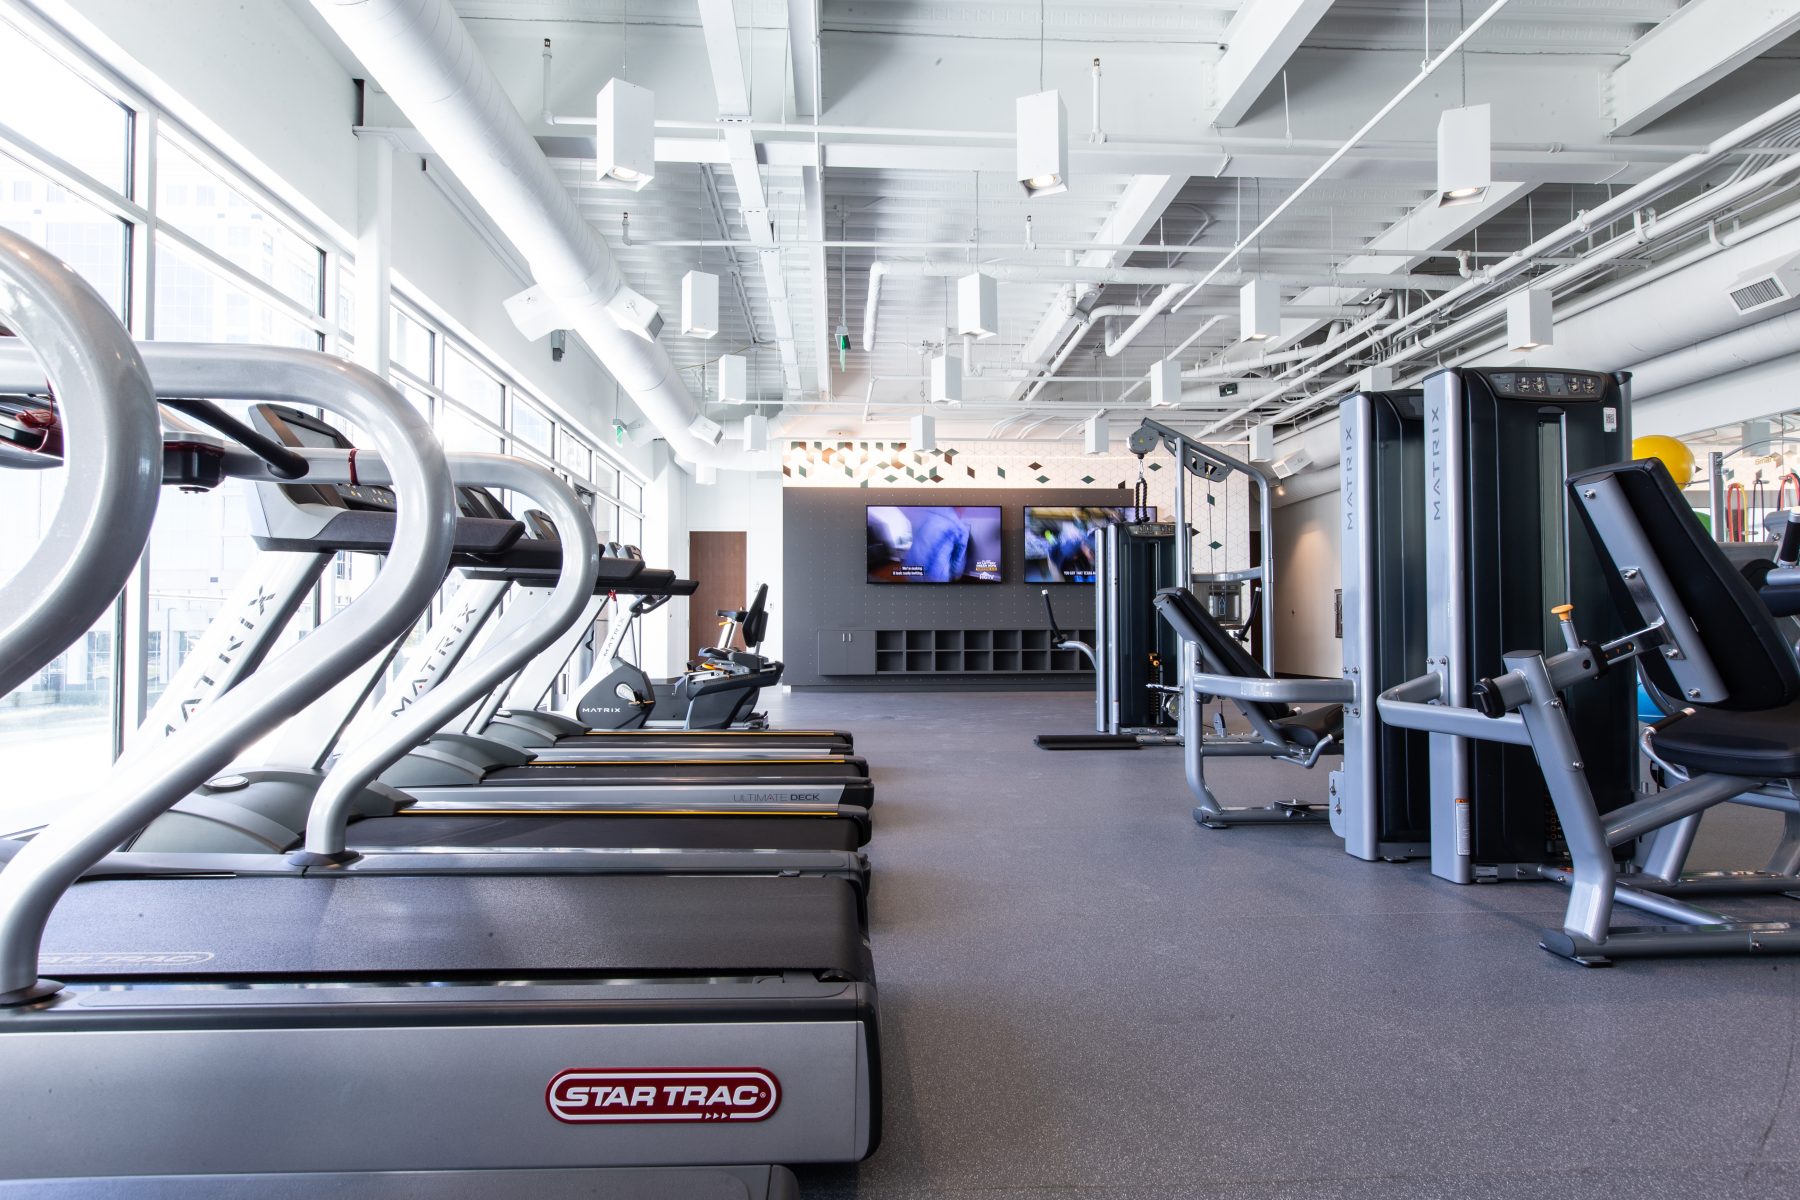 Access to the building’s full service fitness facility